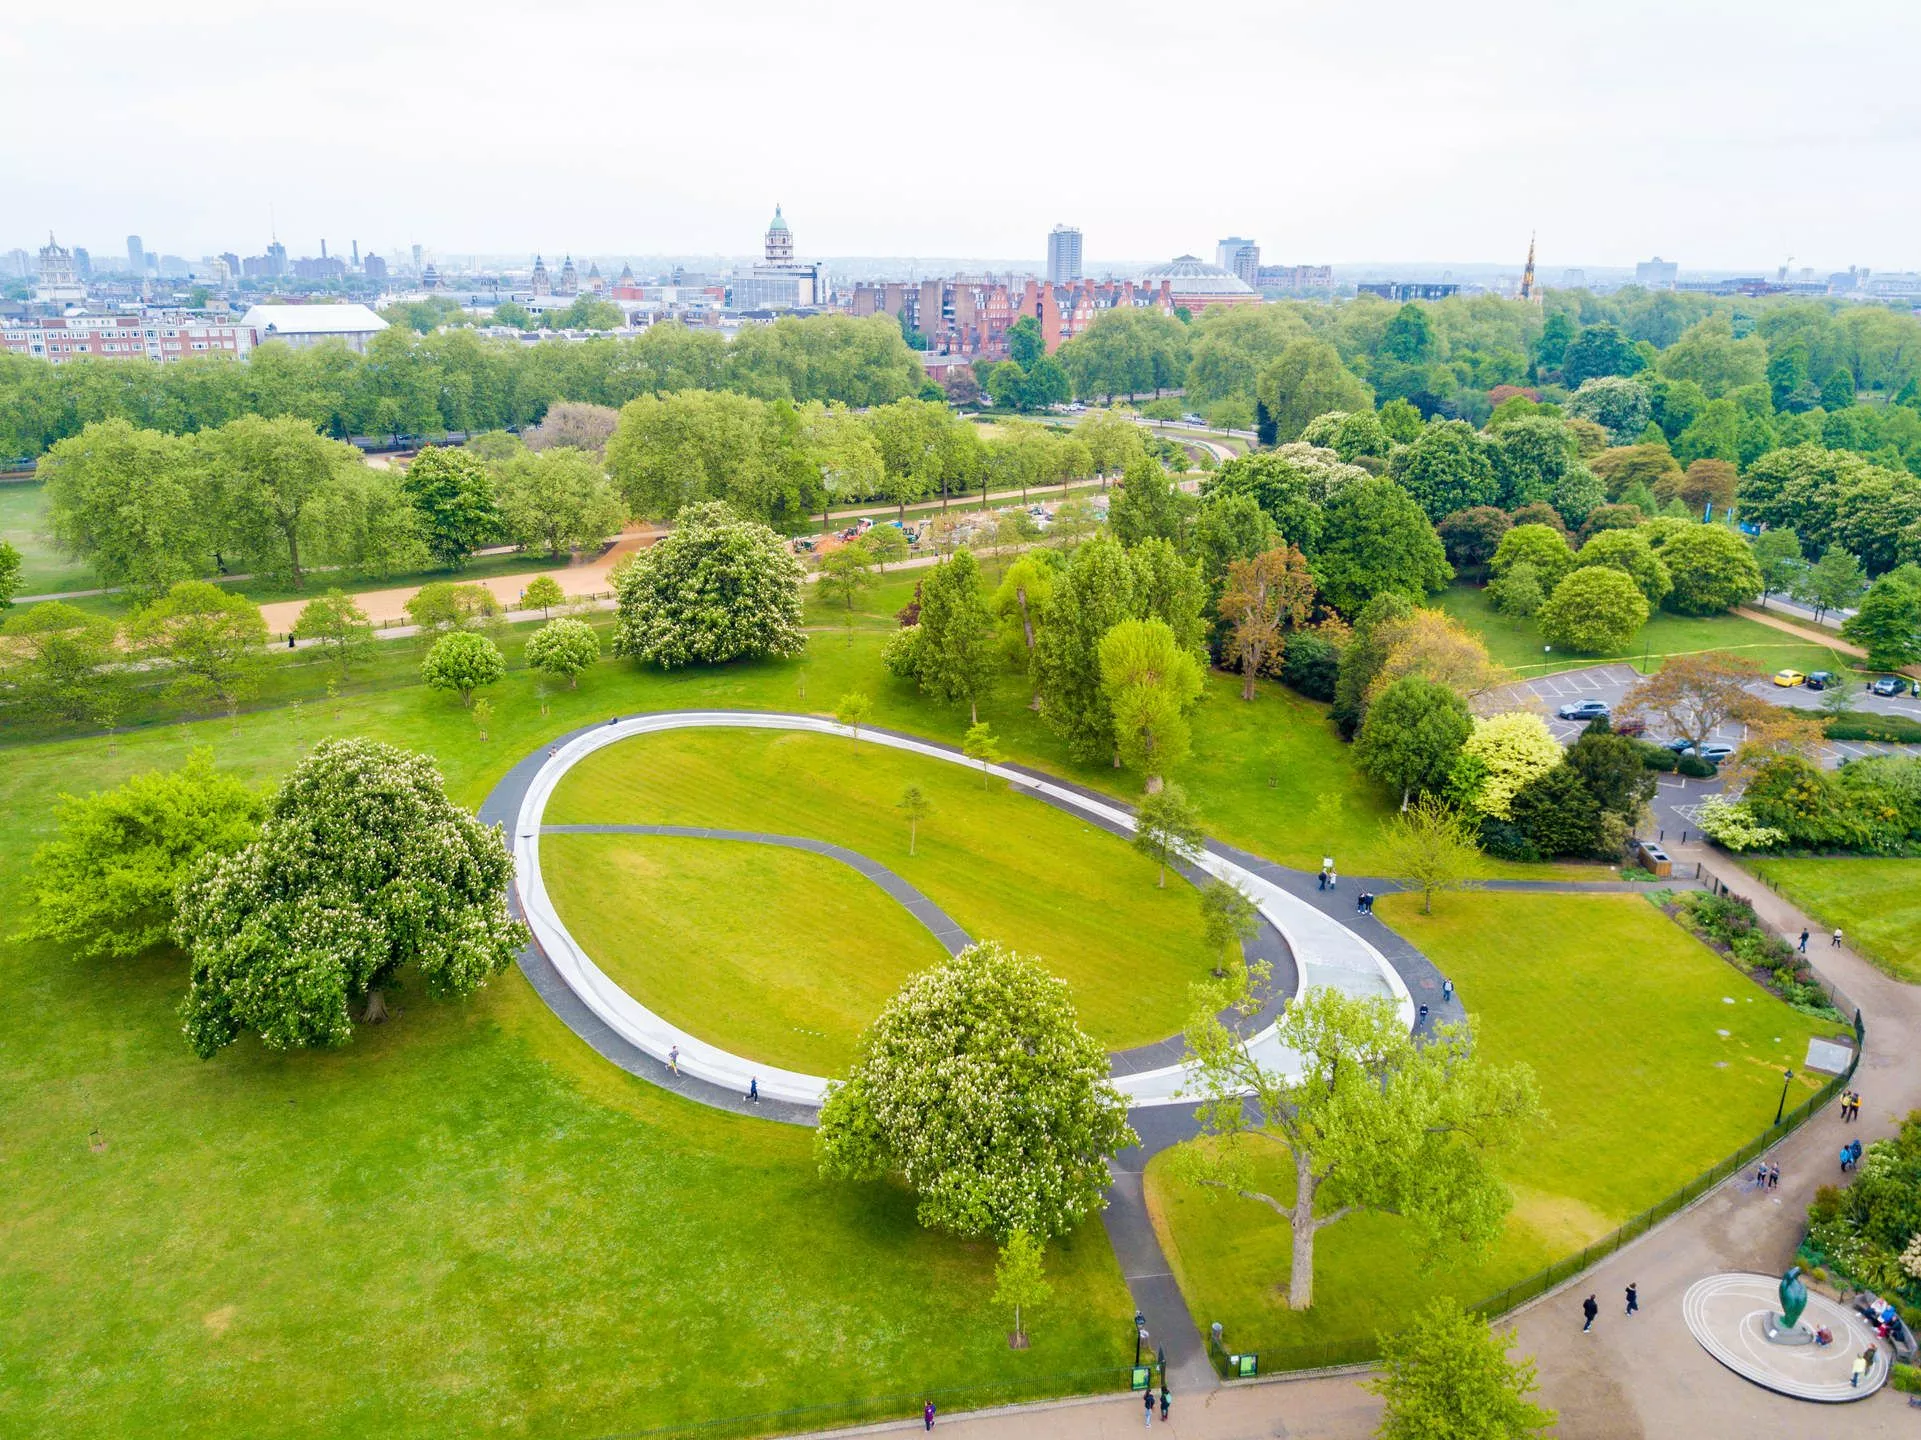 Princess Diana Memorial Fontaine in United Kingdom, Europe | Architecture - Rated 3.7